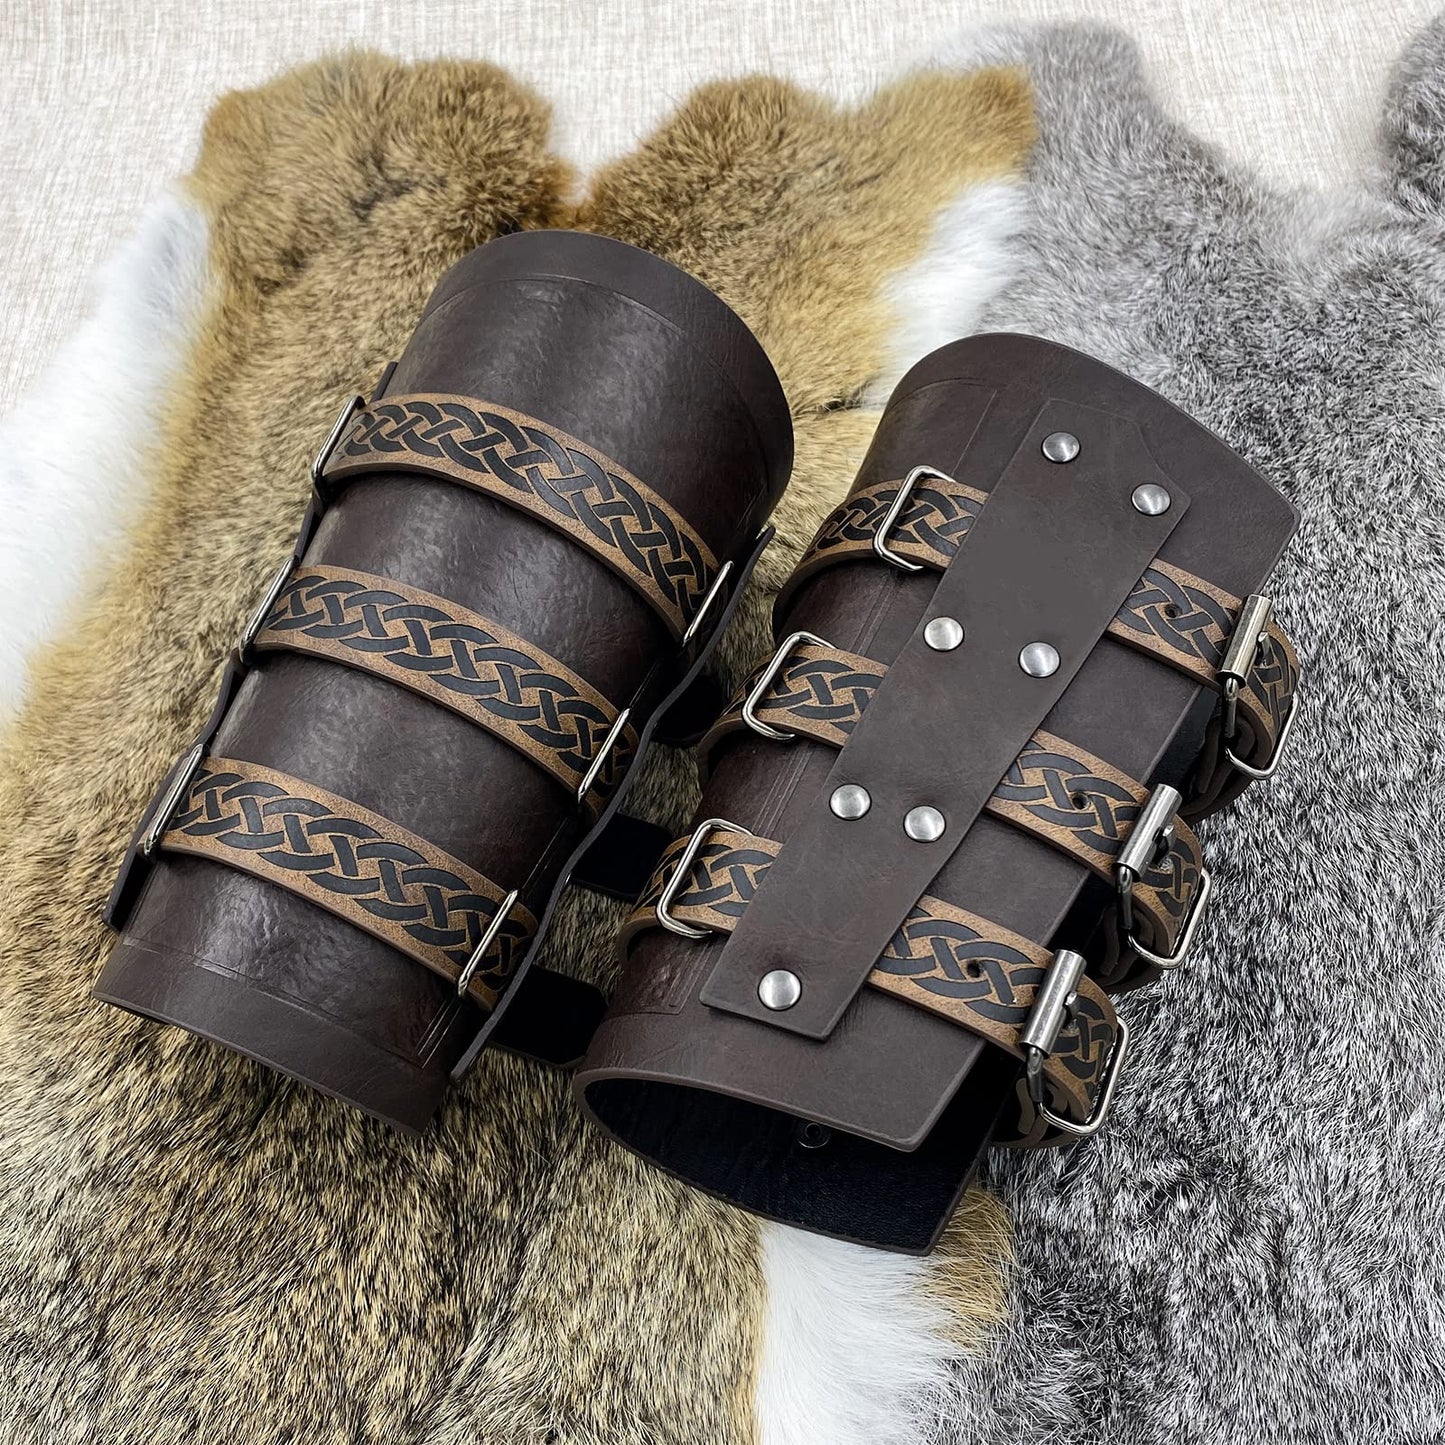 HiiFeuer Medieval Vintage Faux Leather Bracers, Retro Buckle Fastening Mercenary Arm Guards, Costume Knight Gauntlets Brown a